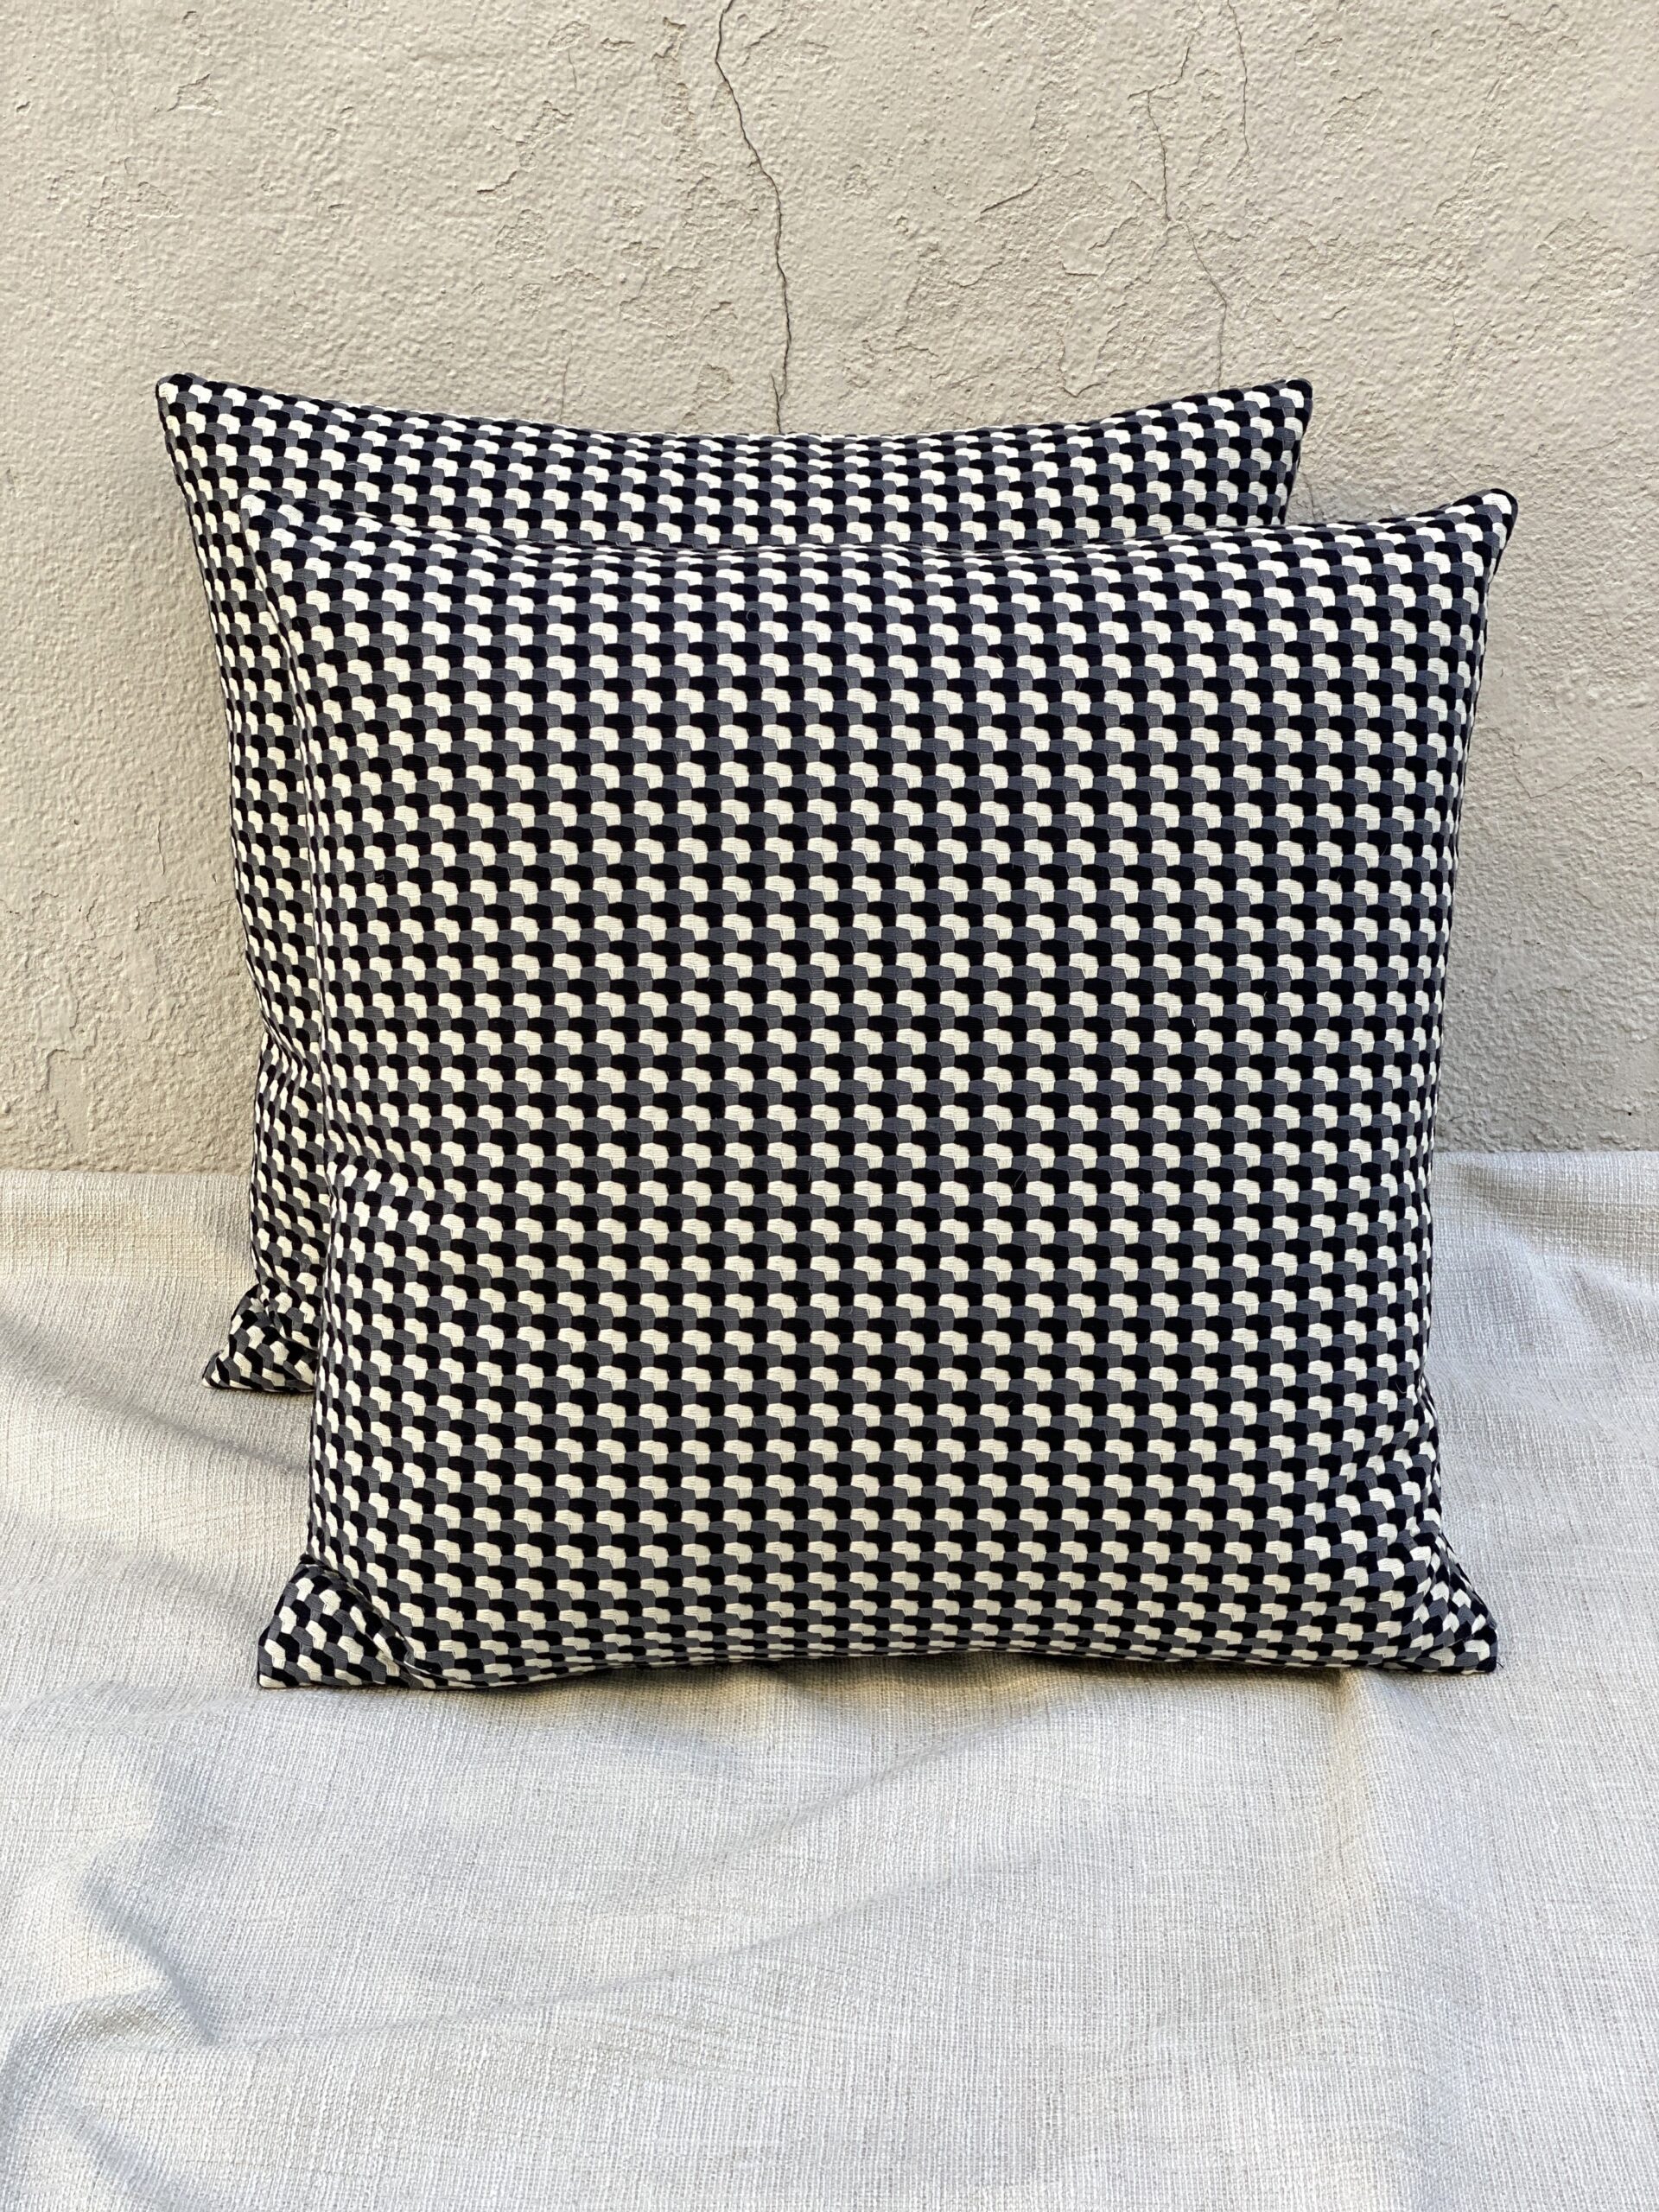 Jessica Blue Small Scale Pillows